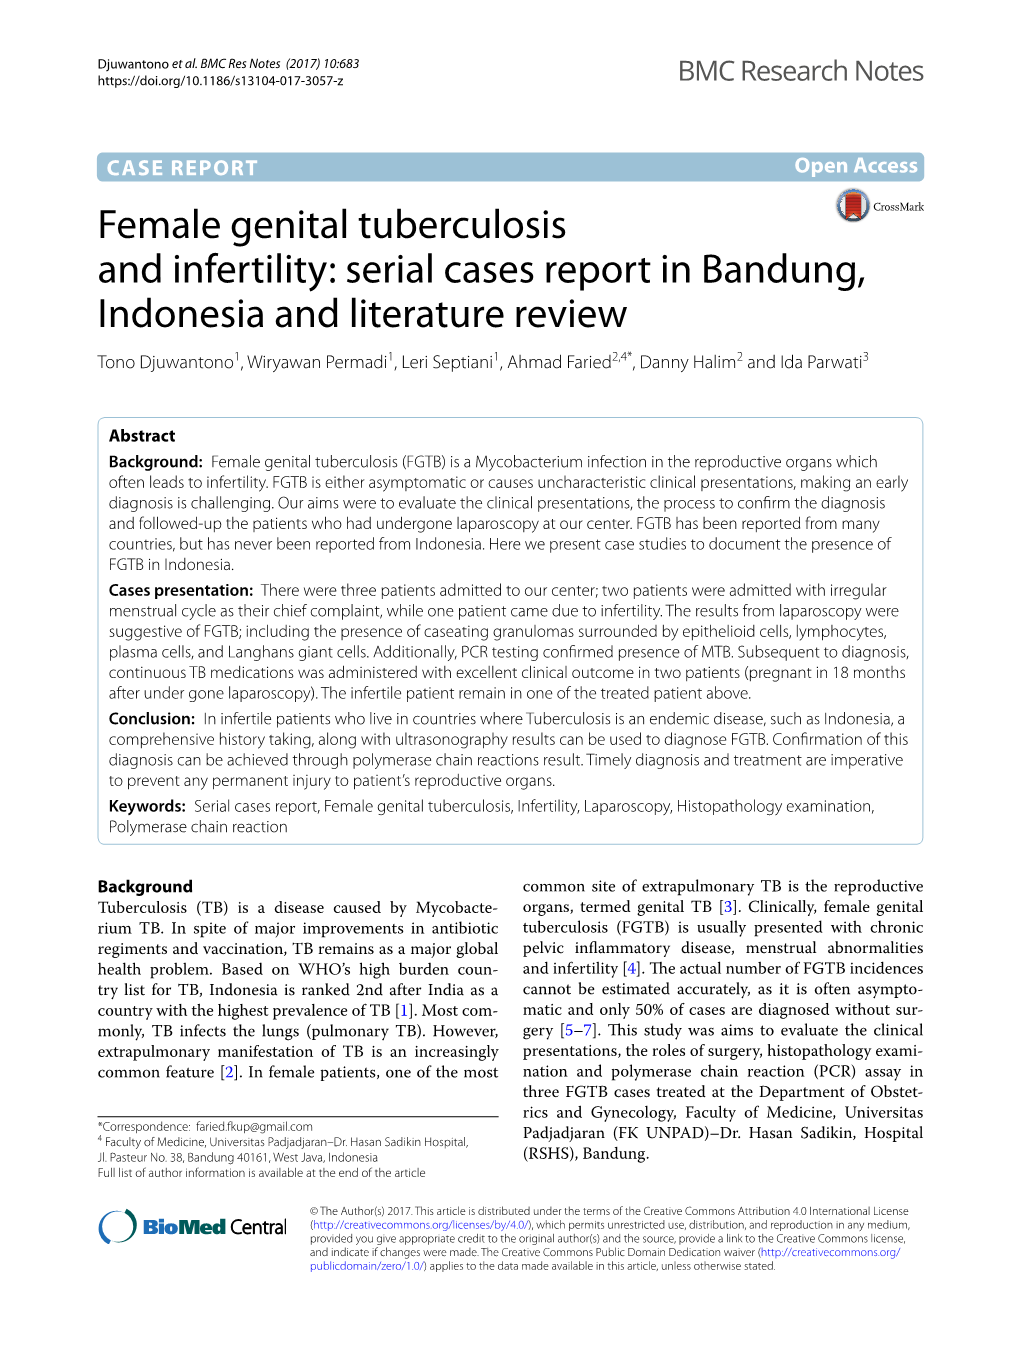 Female Genital Tuberculosis and Infertility: Serial Cases Report In